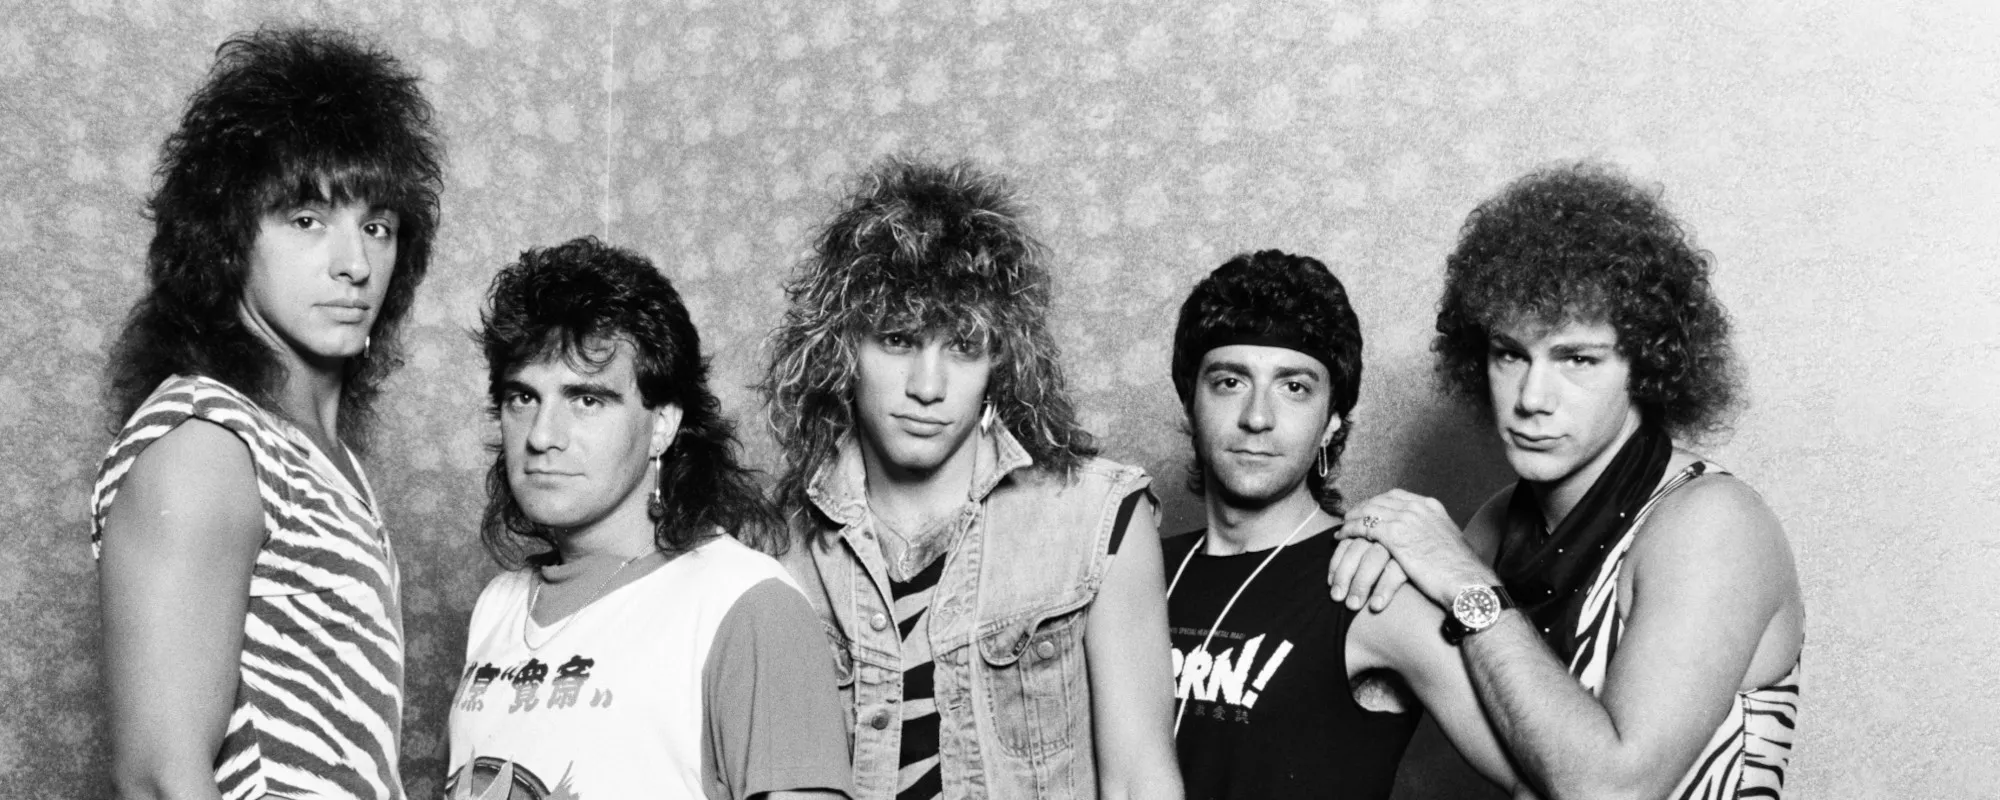 The 8 Best Rock Bands That Got Their Start in the ’80s